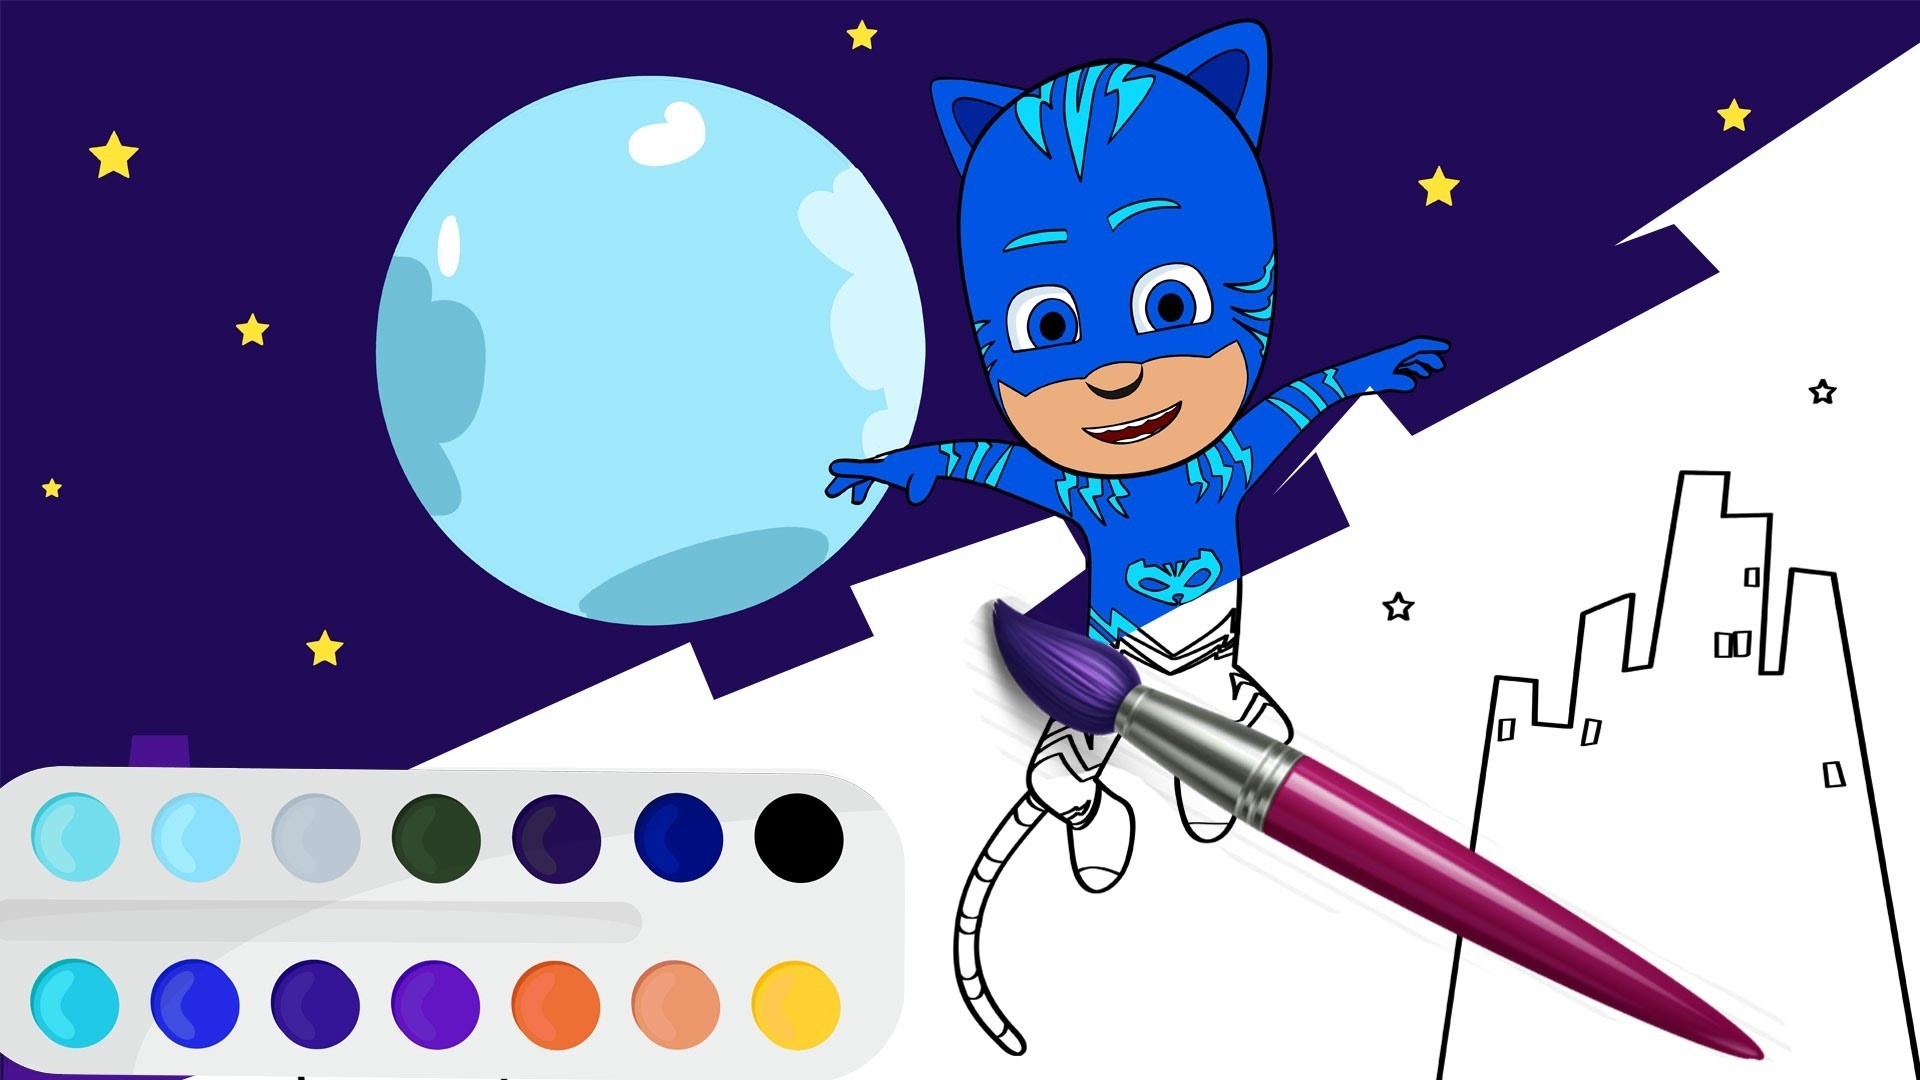 coloring-pages-for-pj-masks-best-of-catboy-coloring-page-collection-printable-coloring-pages-refrence-pj-masks-gecko-coloring-pages-best-pj-masks-coloring-pages-of-coloring-pages-for-pj-masks-best-of